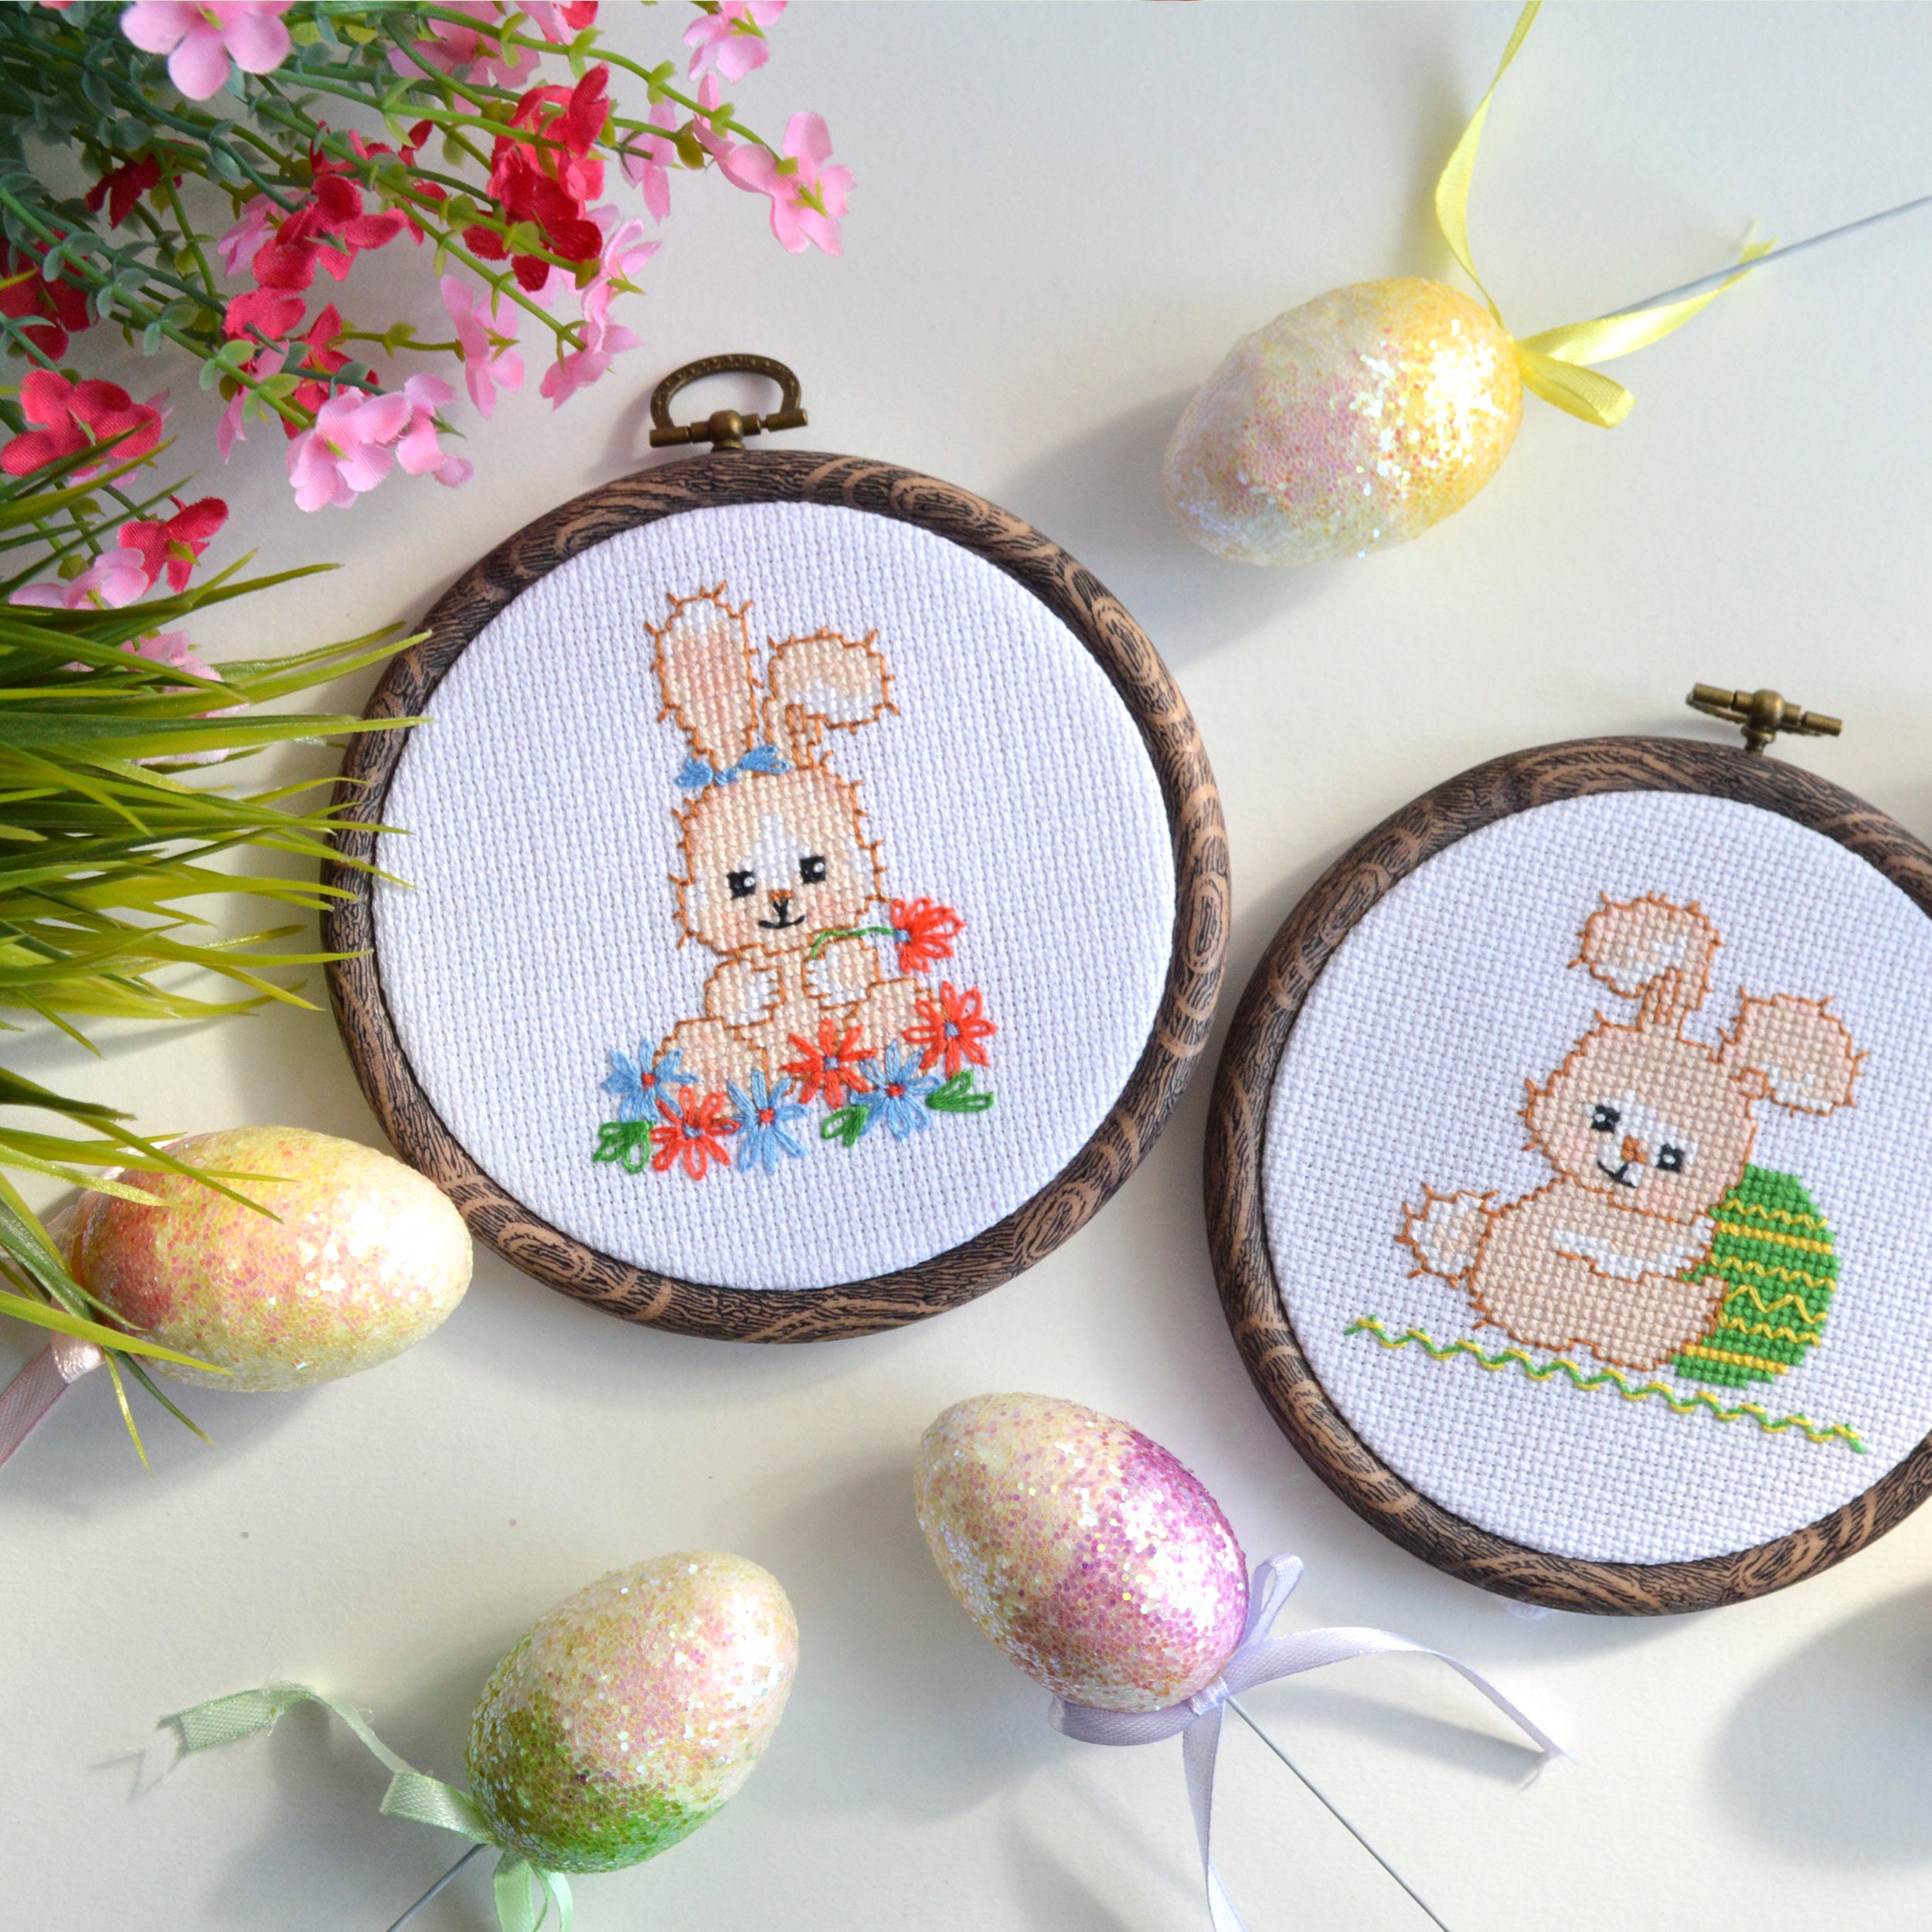 Easter Bunny Cross Stitch Kit with Counted Pattern DIY Beginners Embroidery  KIt